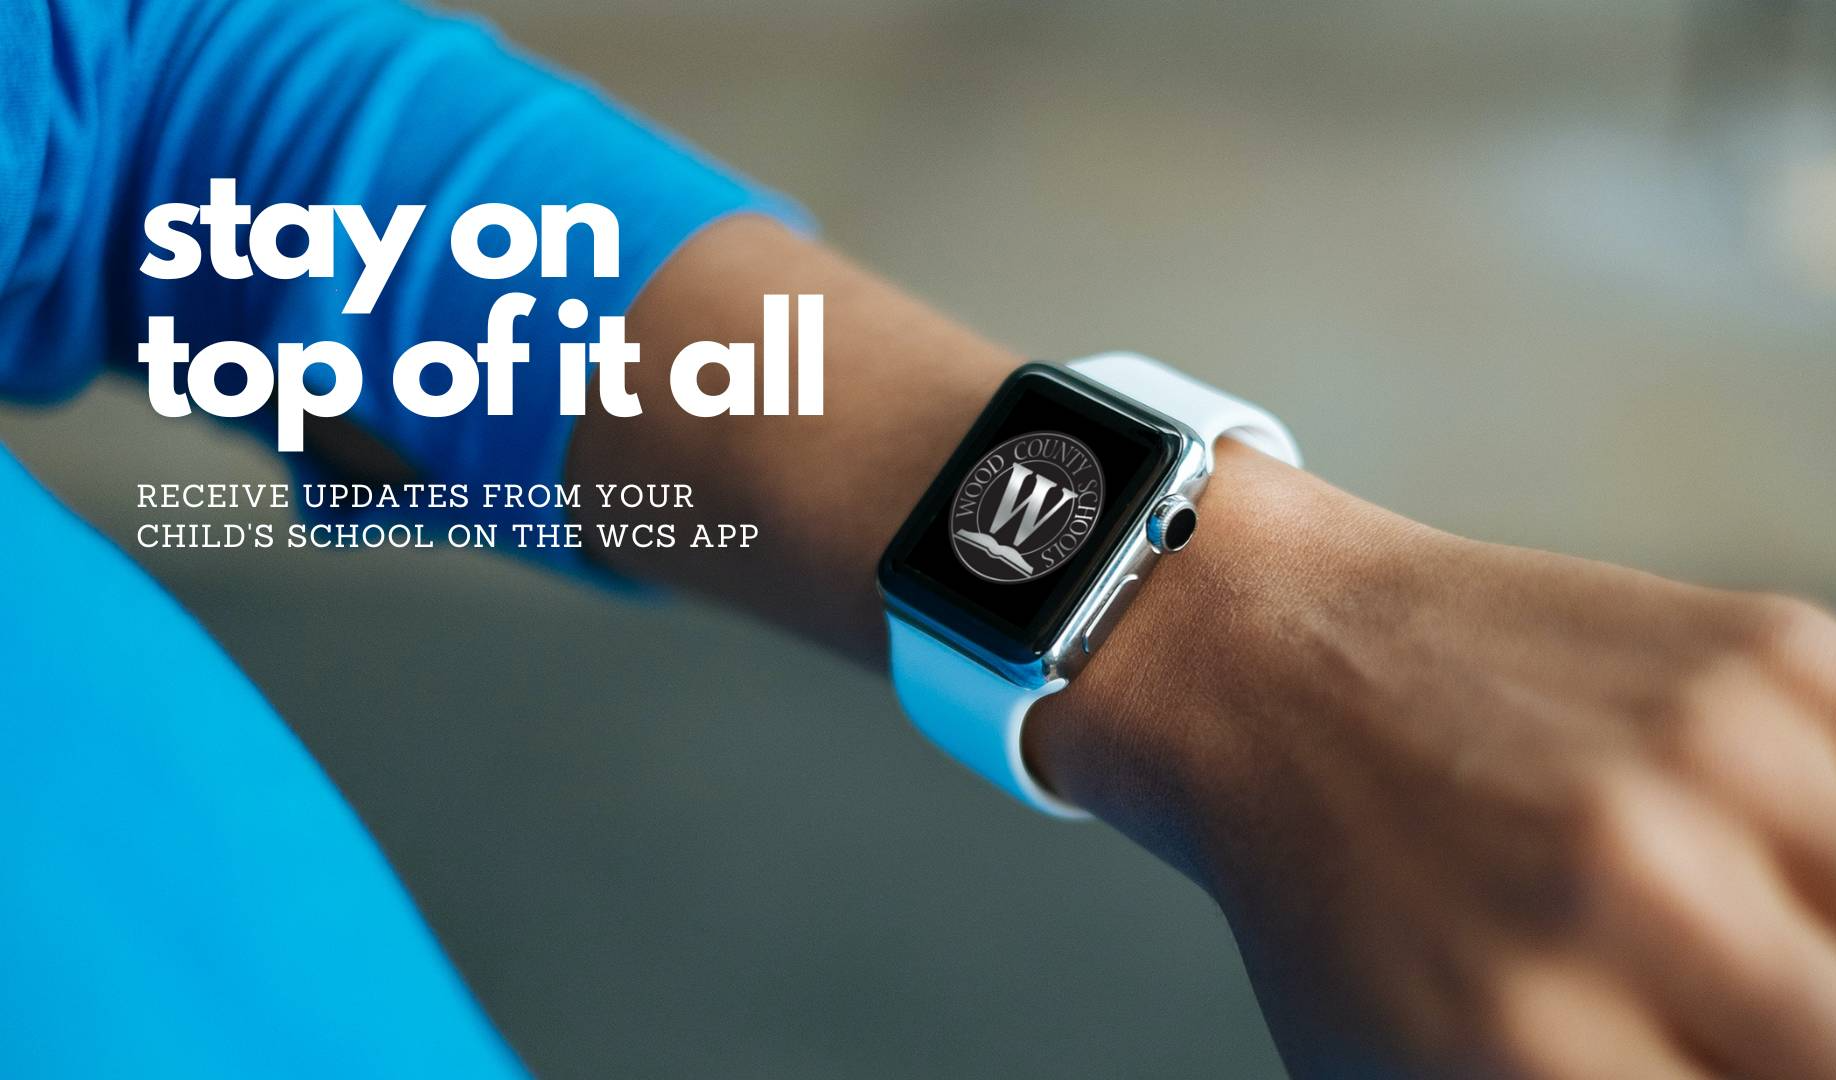 image of arm with Apple Watch with Wood County Schools logo on watch face. The slogan says "stay on top of it all - receive updates on the WCS app."